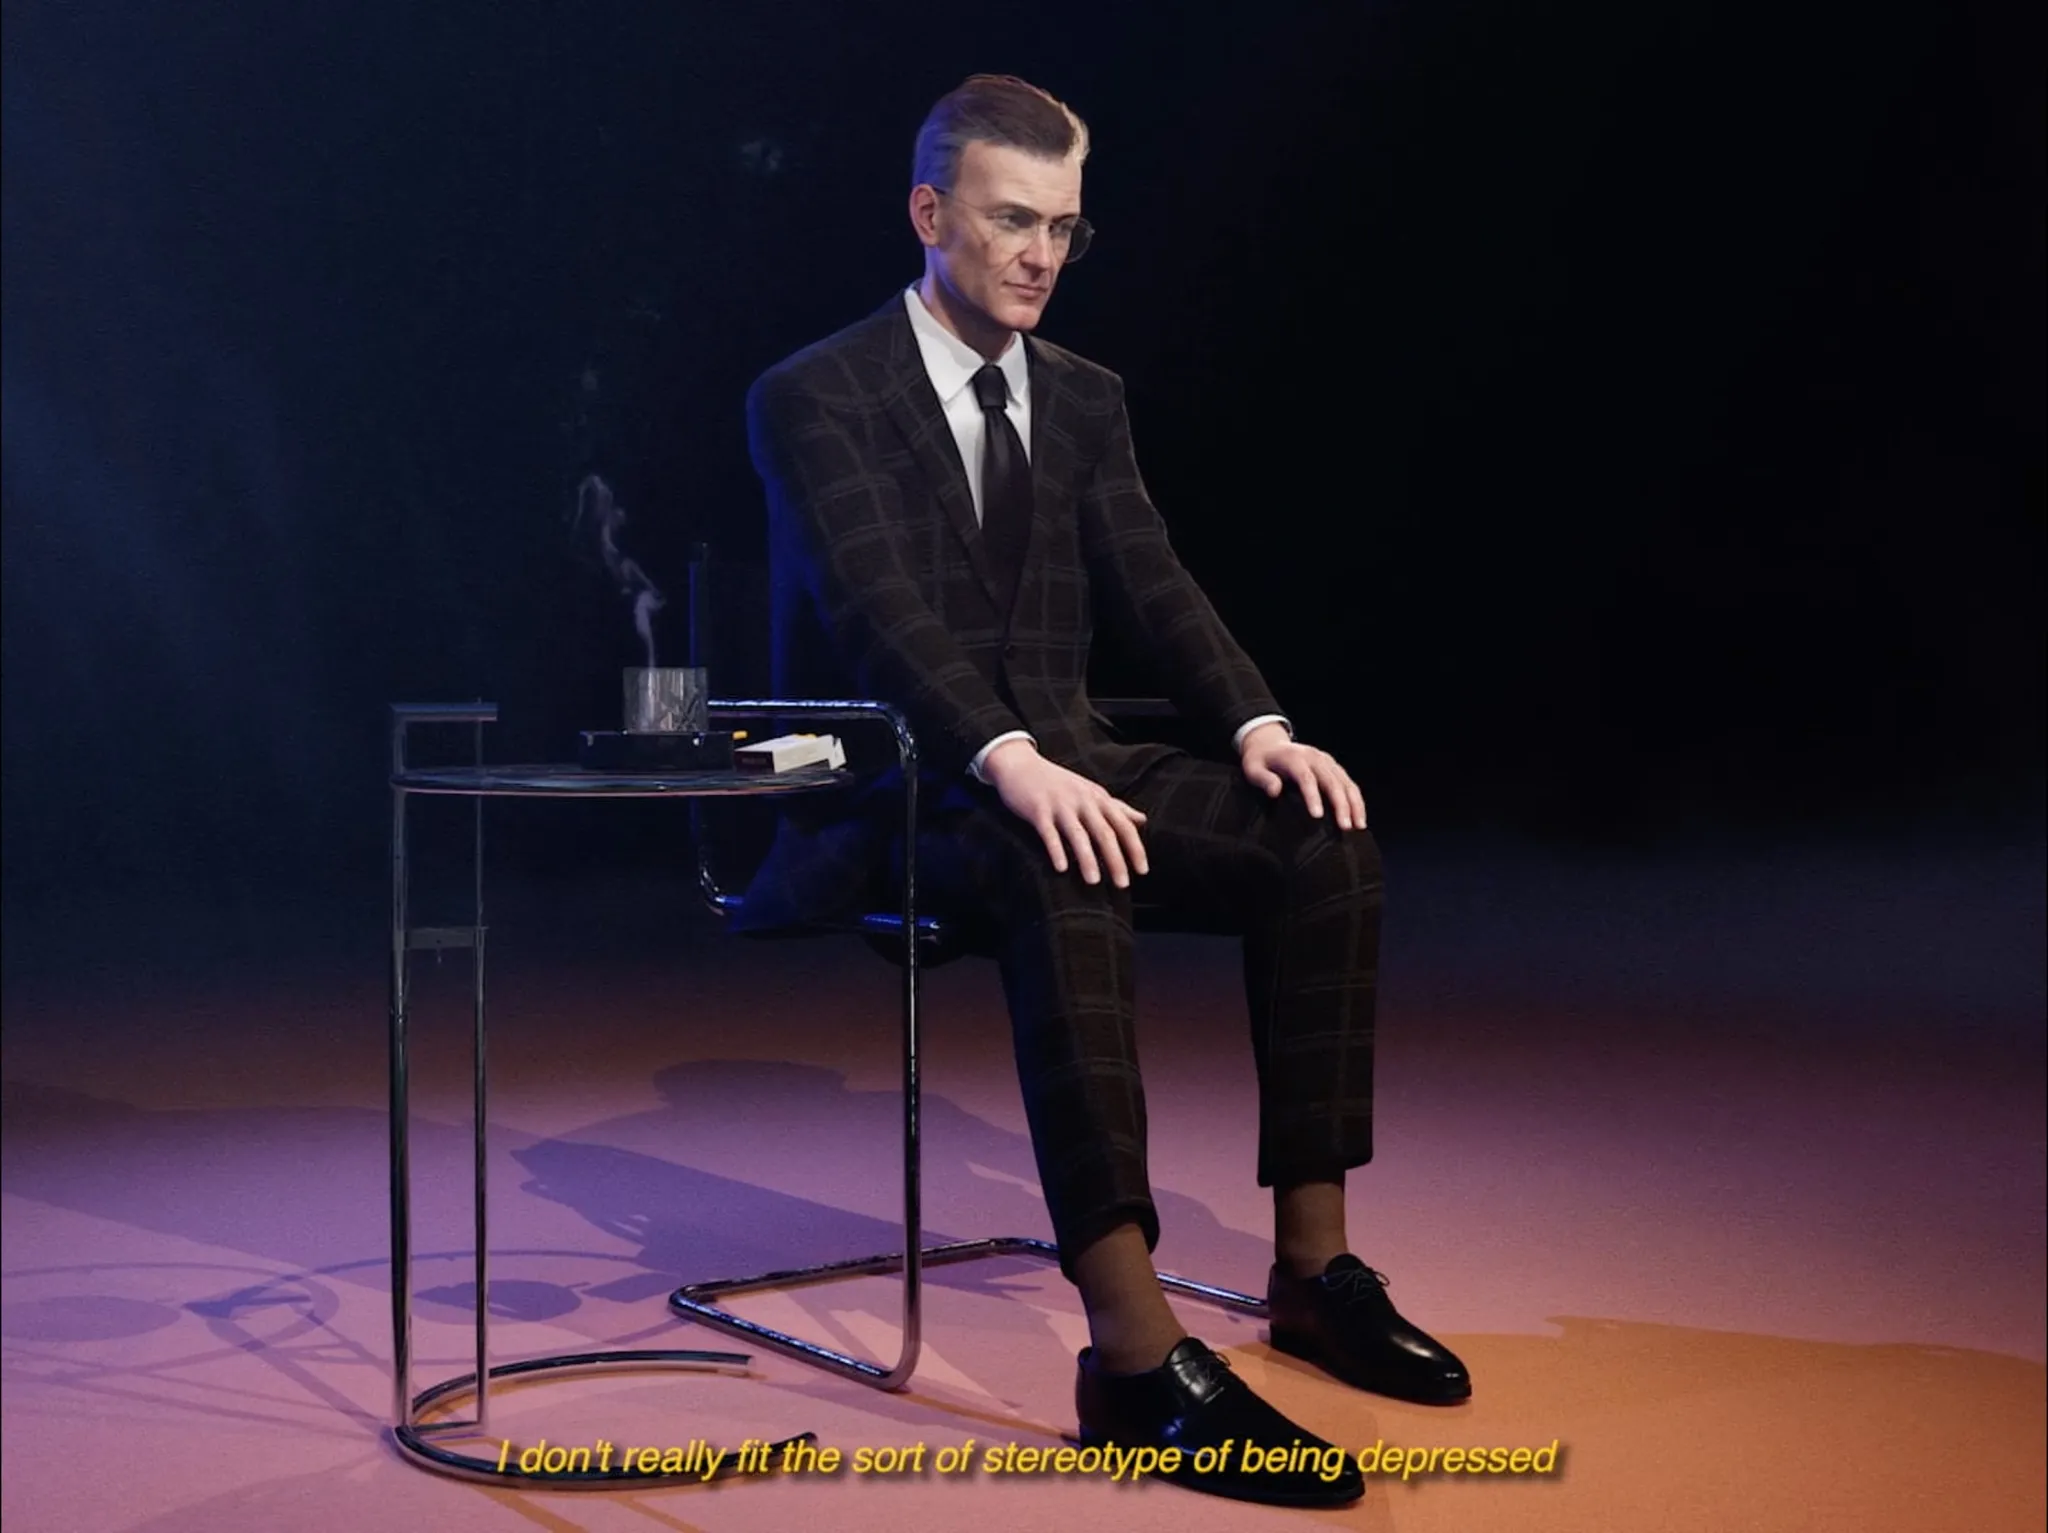 The same person sitting on a chair next to a side table with burning cigarettes, wearing a checked suit. The quote says 'I don't really fit the sort of stereotype of being depressed'.